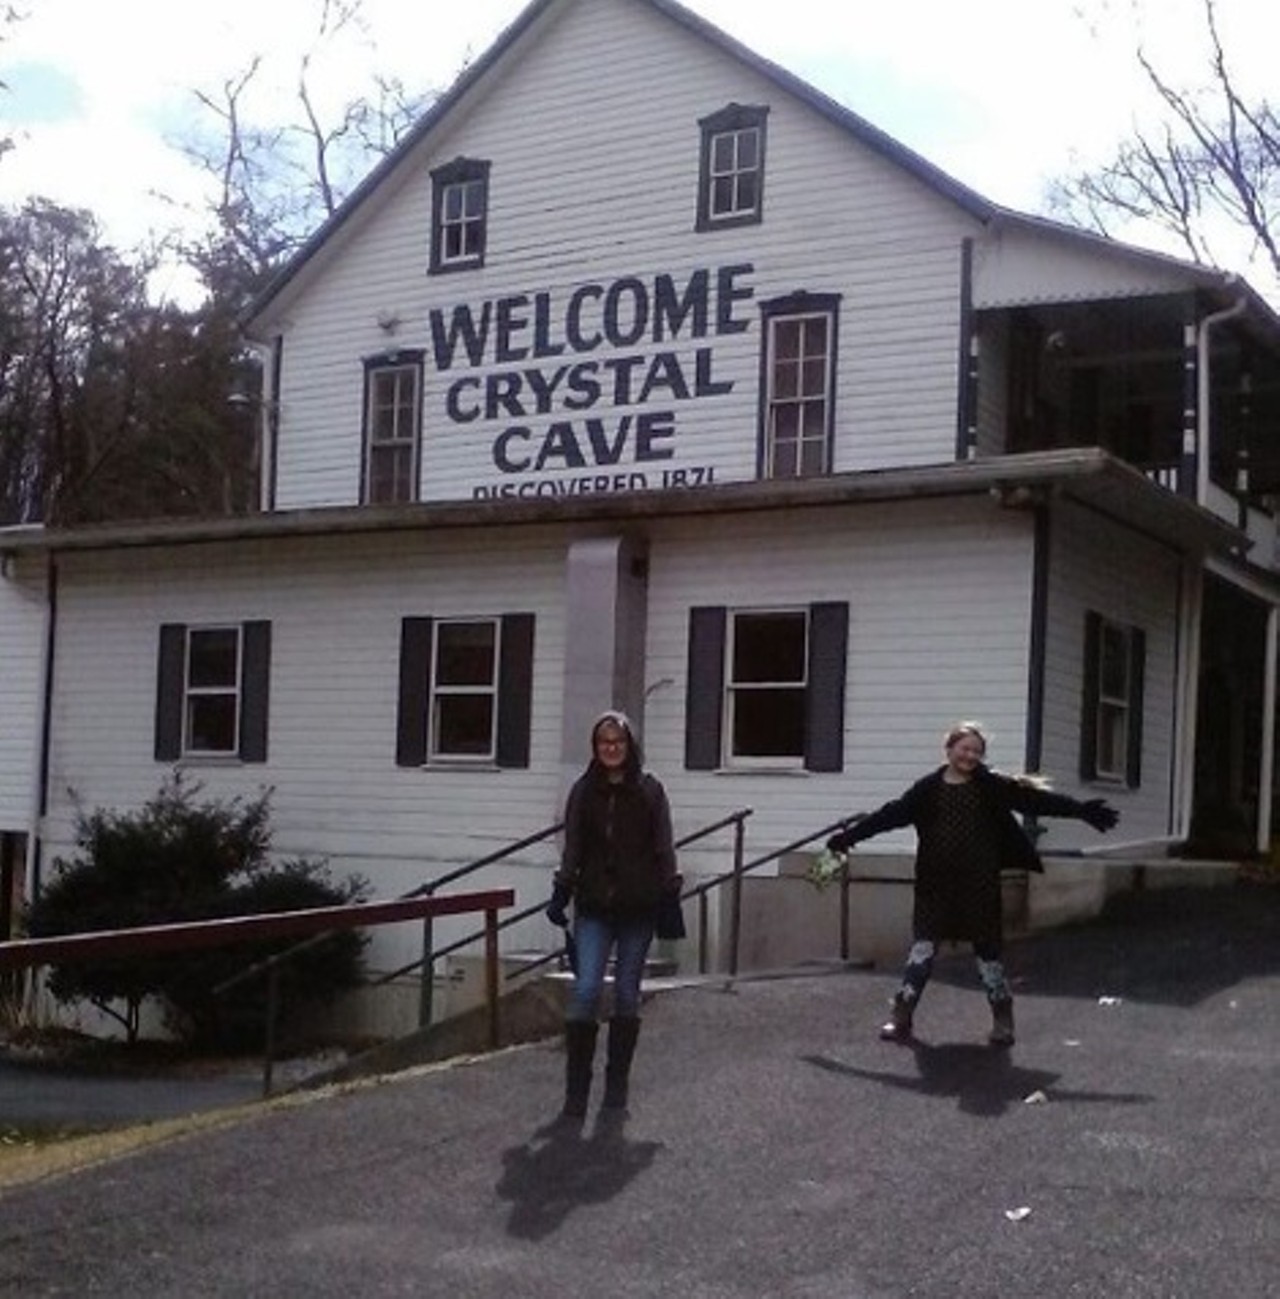 Crystal Cave
978 Catawba Avenue, Put-In-Bay, 419-285-2811
What you need to know is there&#146;s a winery here, Heineman&#146;s Winery, that&#146;s been around since the late 1800s. But before you drink all the wine, do go down to Crystal Cave and look at the celestine crystals. They&#146;re magical. The ride from Cleveland takes about two hours and includes a ferry to South Bass Island.
Photo via heavy_metal_mikey/Instagram